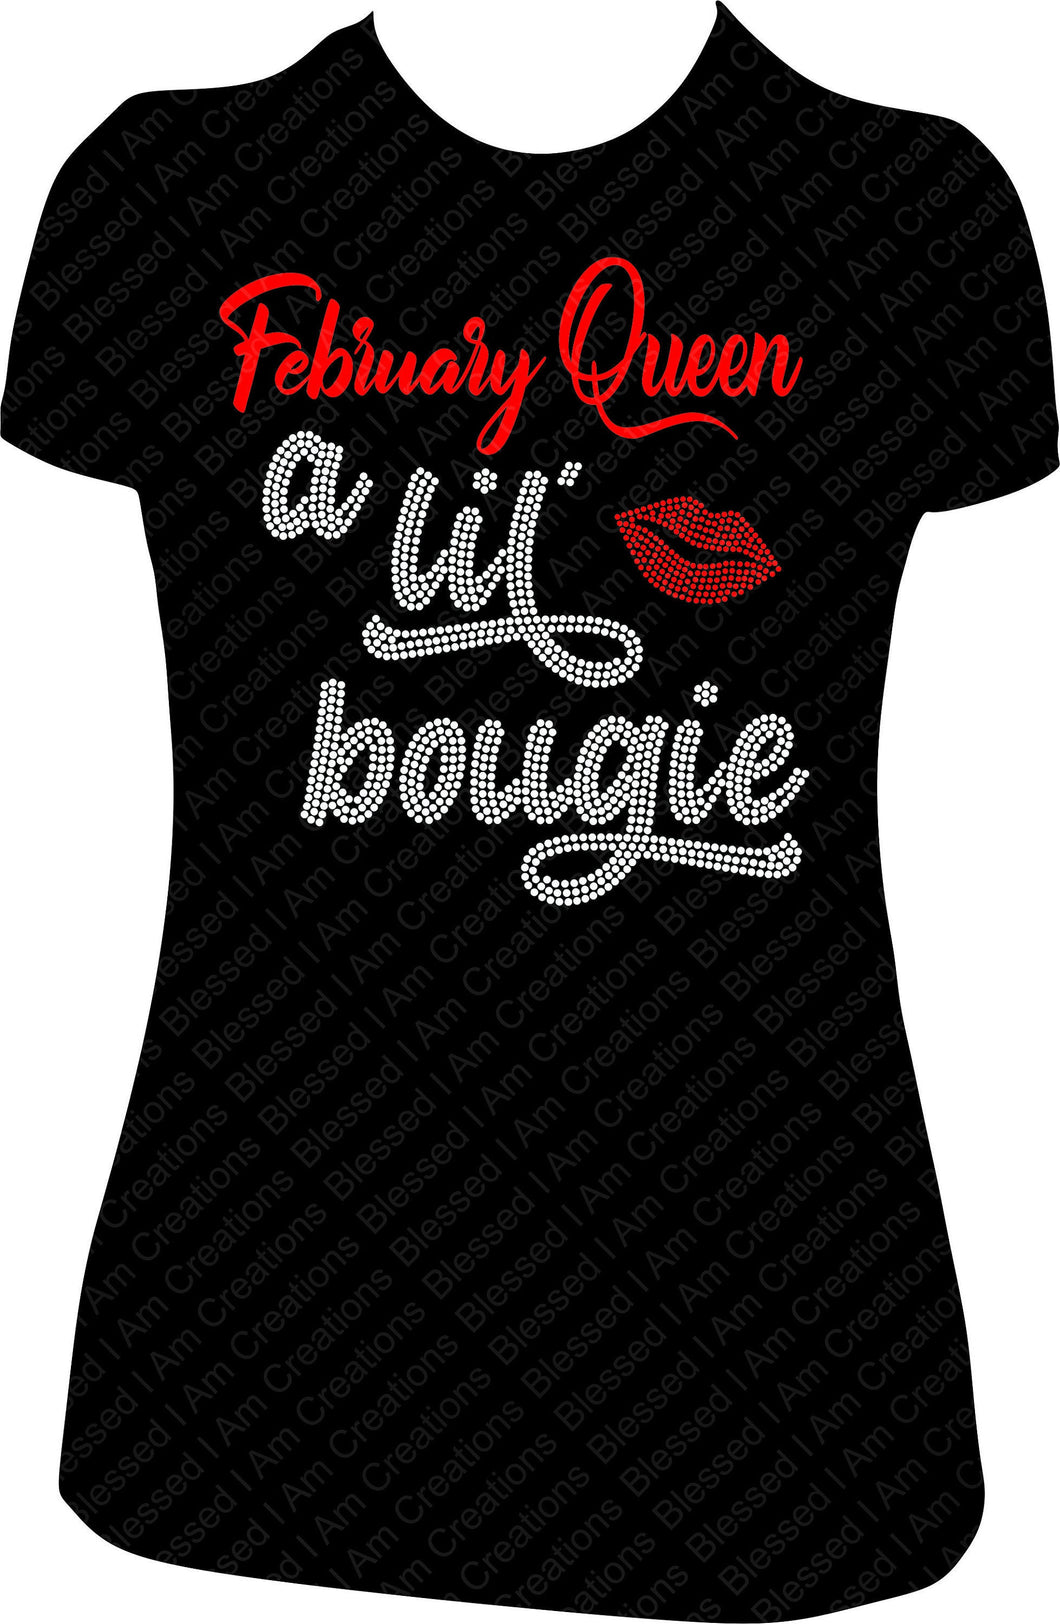 February Queen a lil bougie Birthday Shirt  February Bling Collection